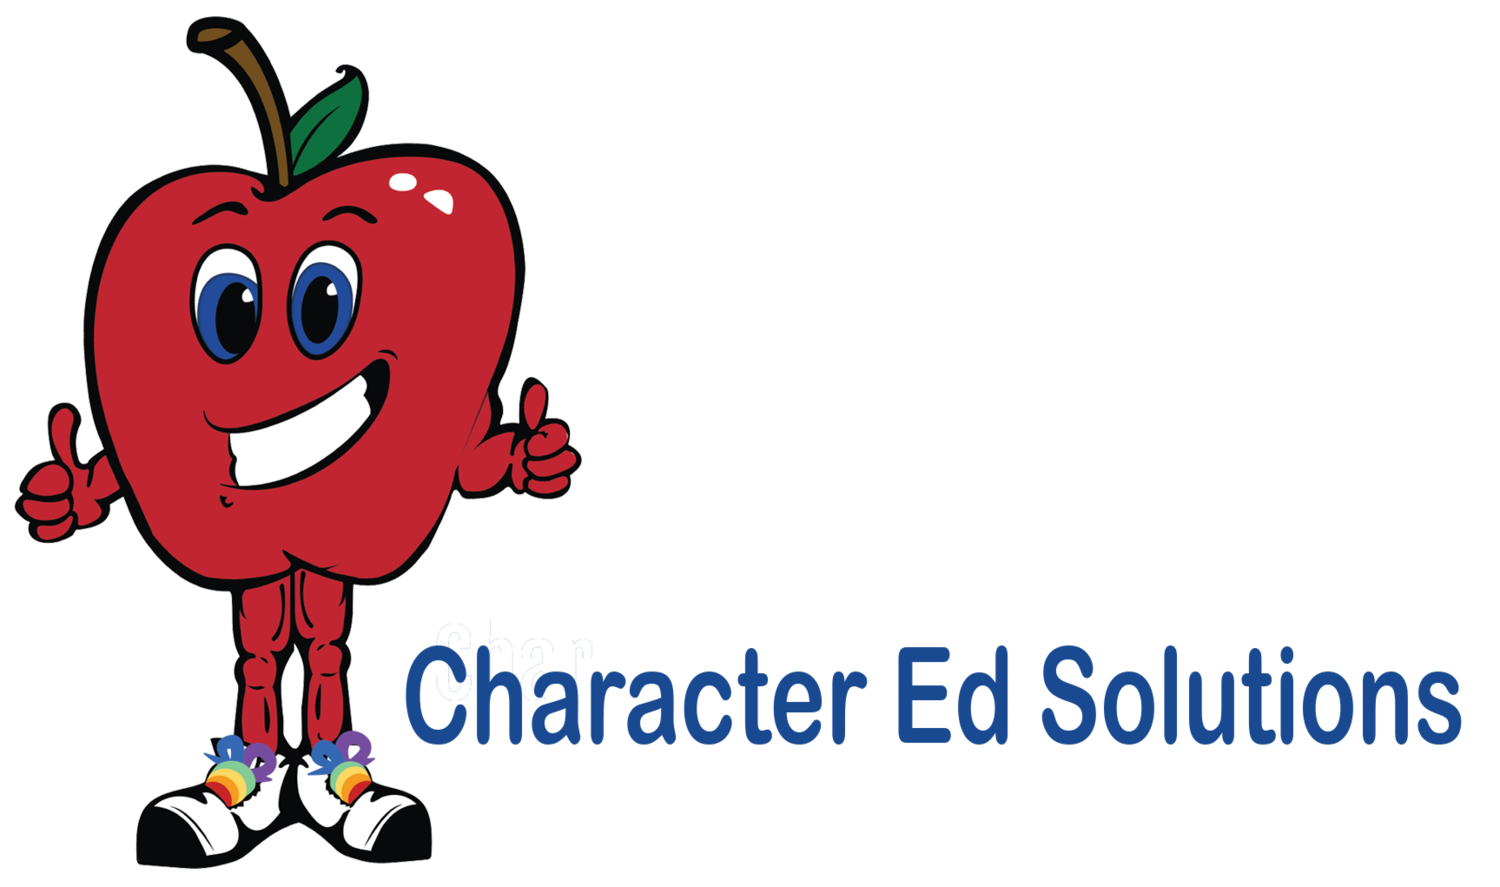 Character Ed Solutions